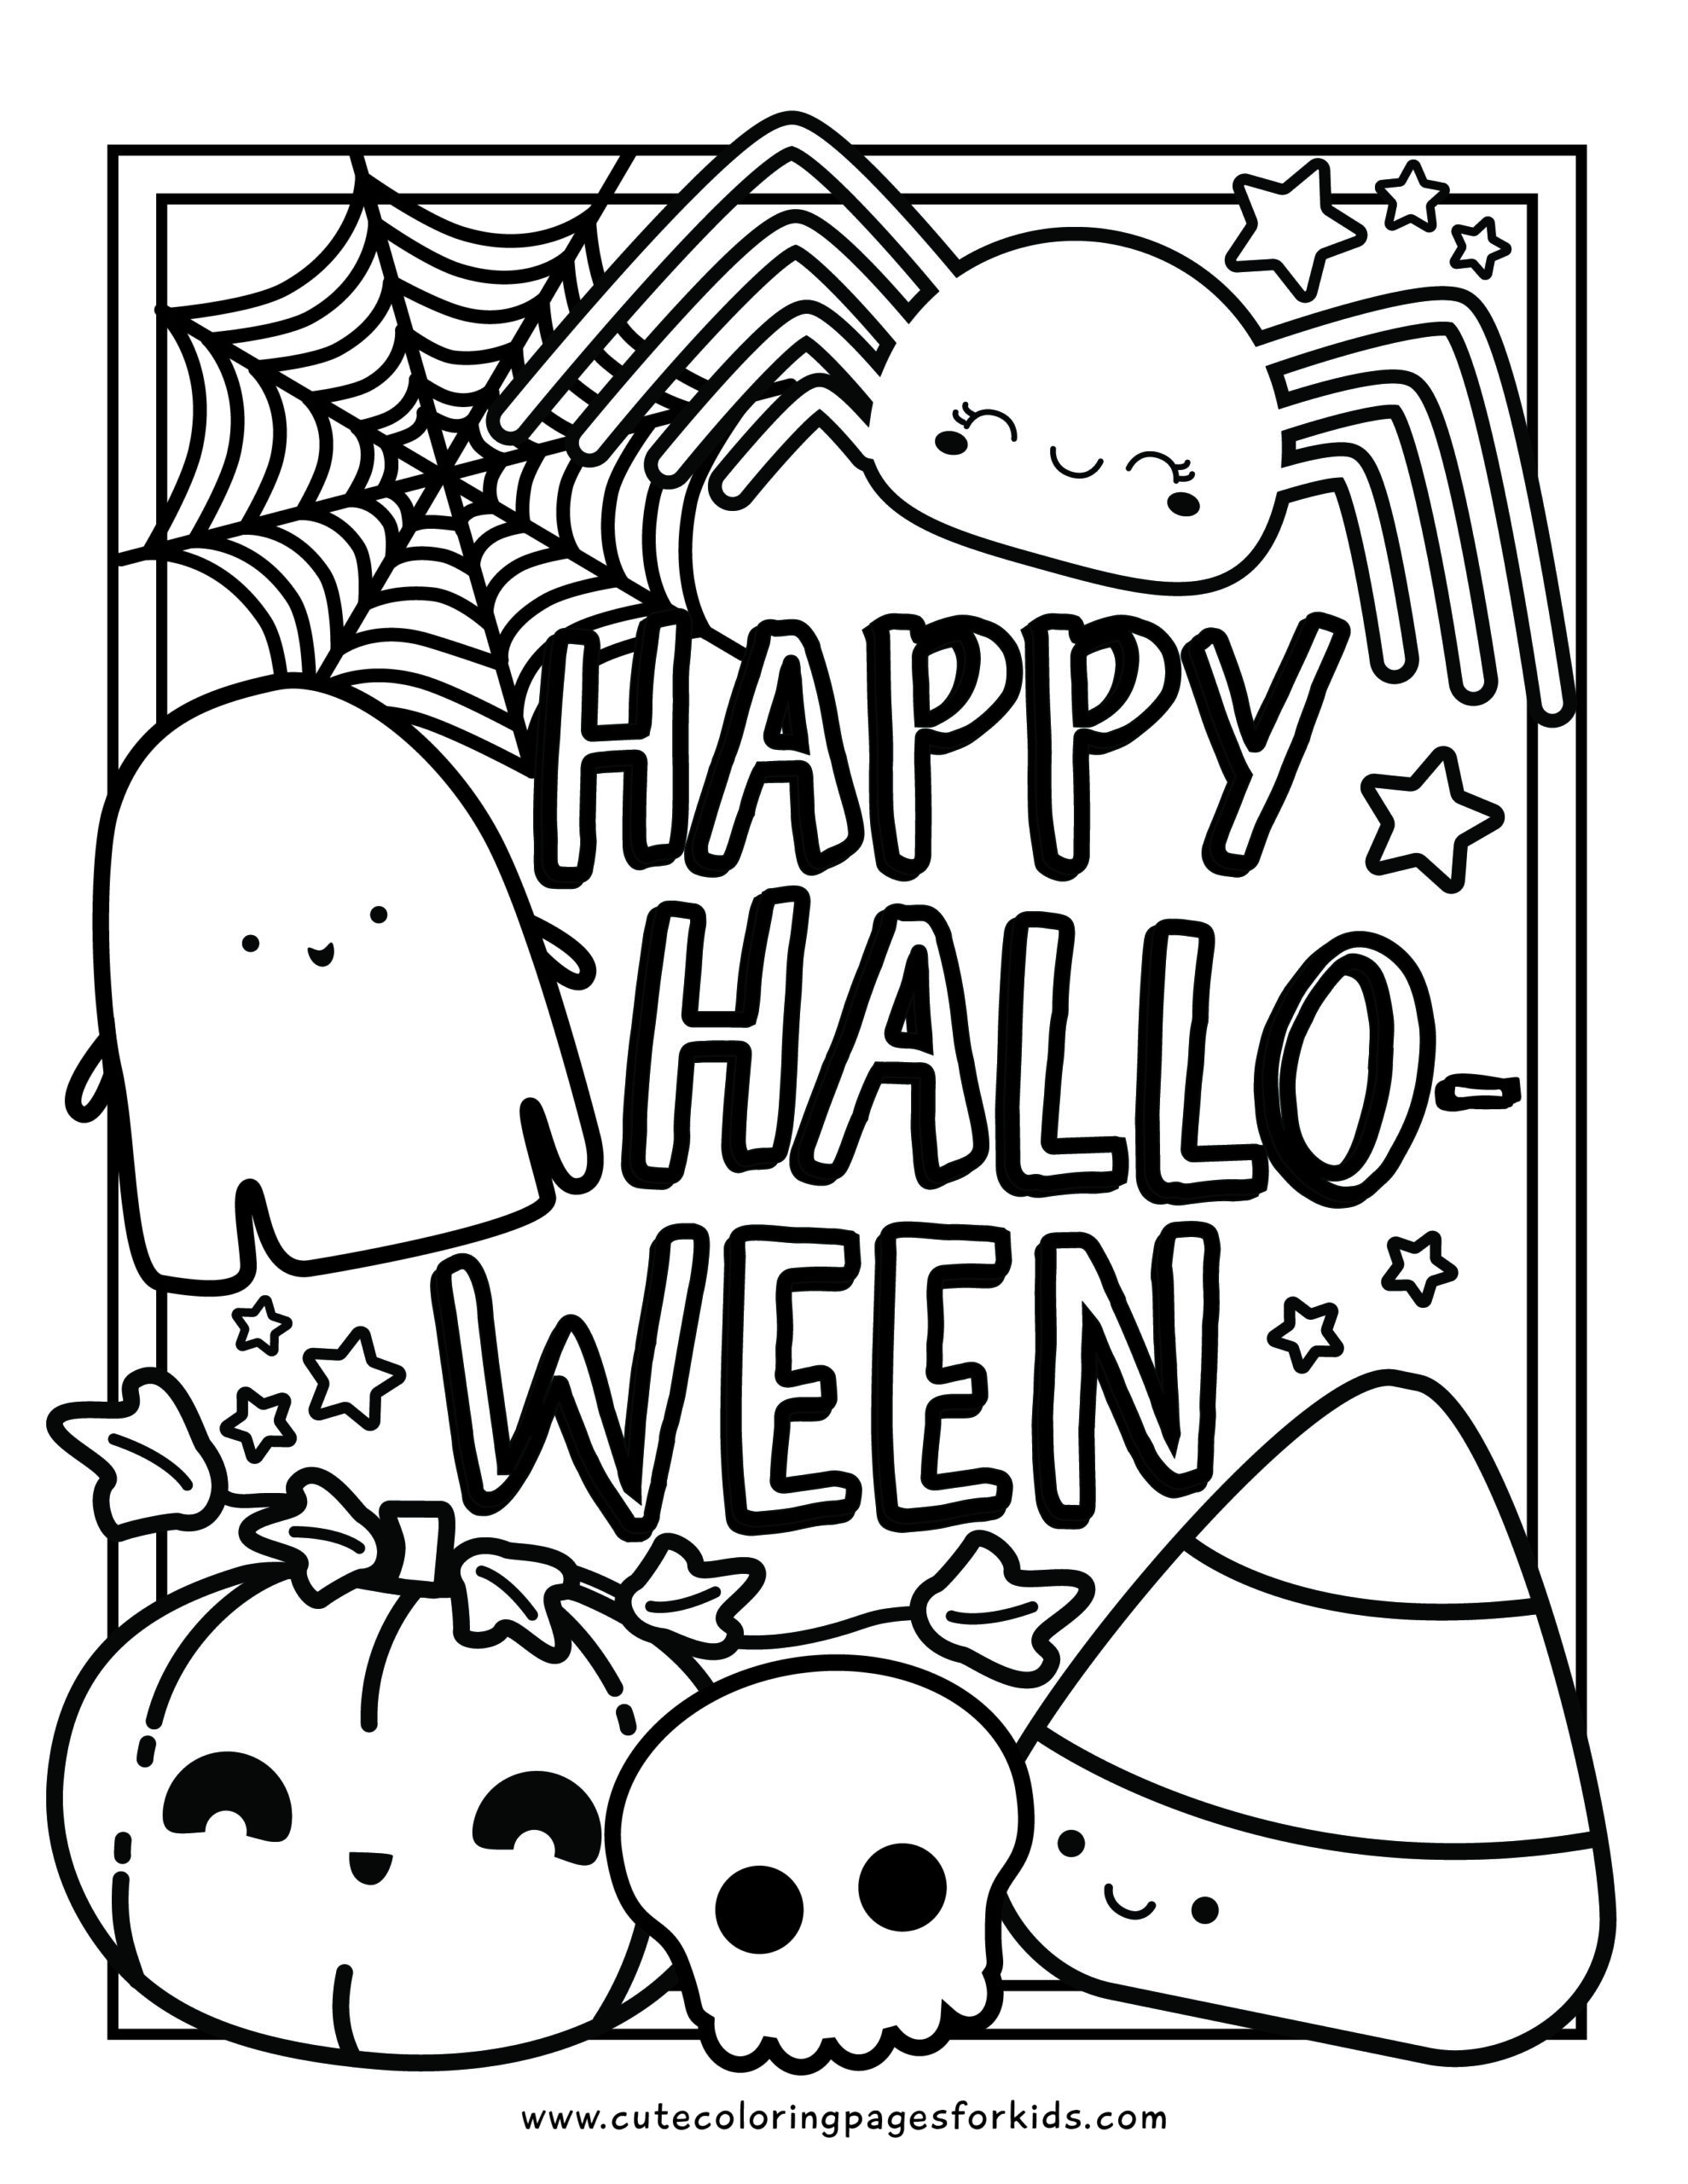 https://www.cutecoloringpagesforkids.com/wp-content/uploads/2022/08/happy-halloween-coloring-page-scaled.jpg